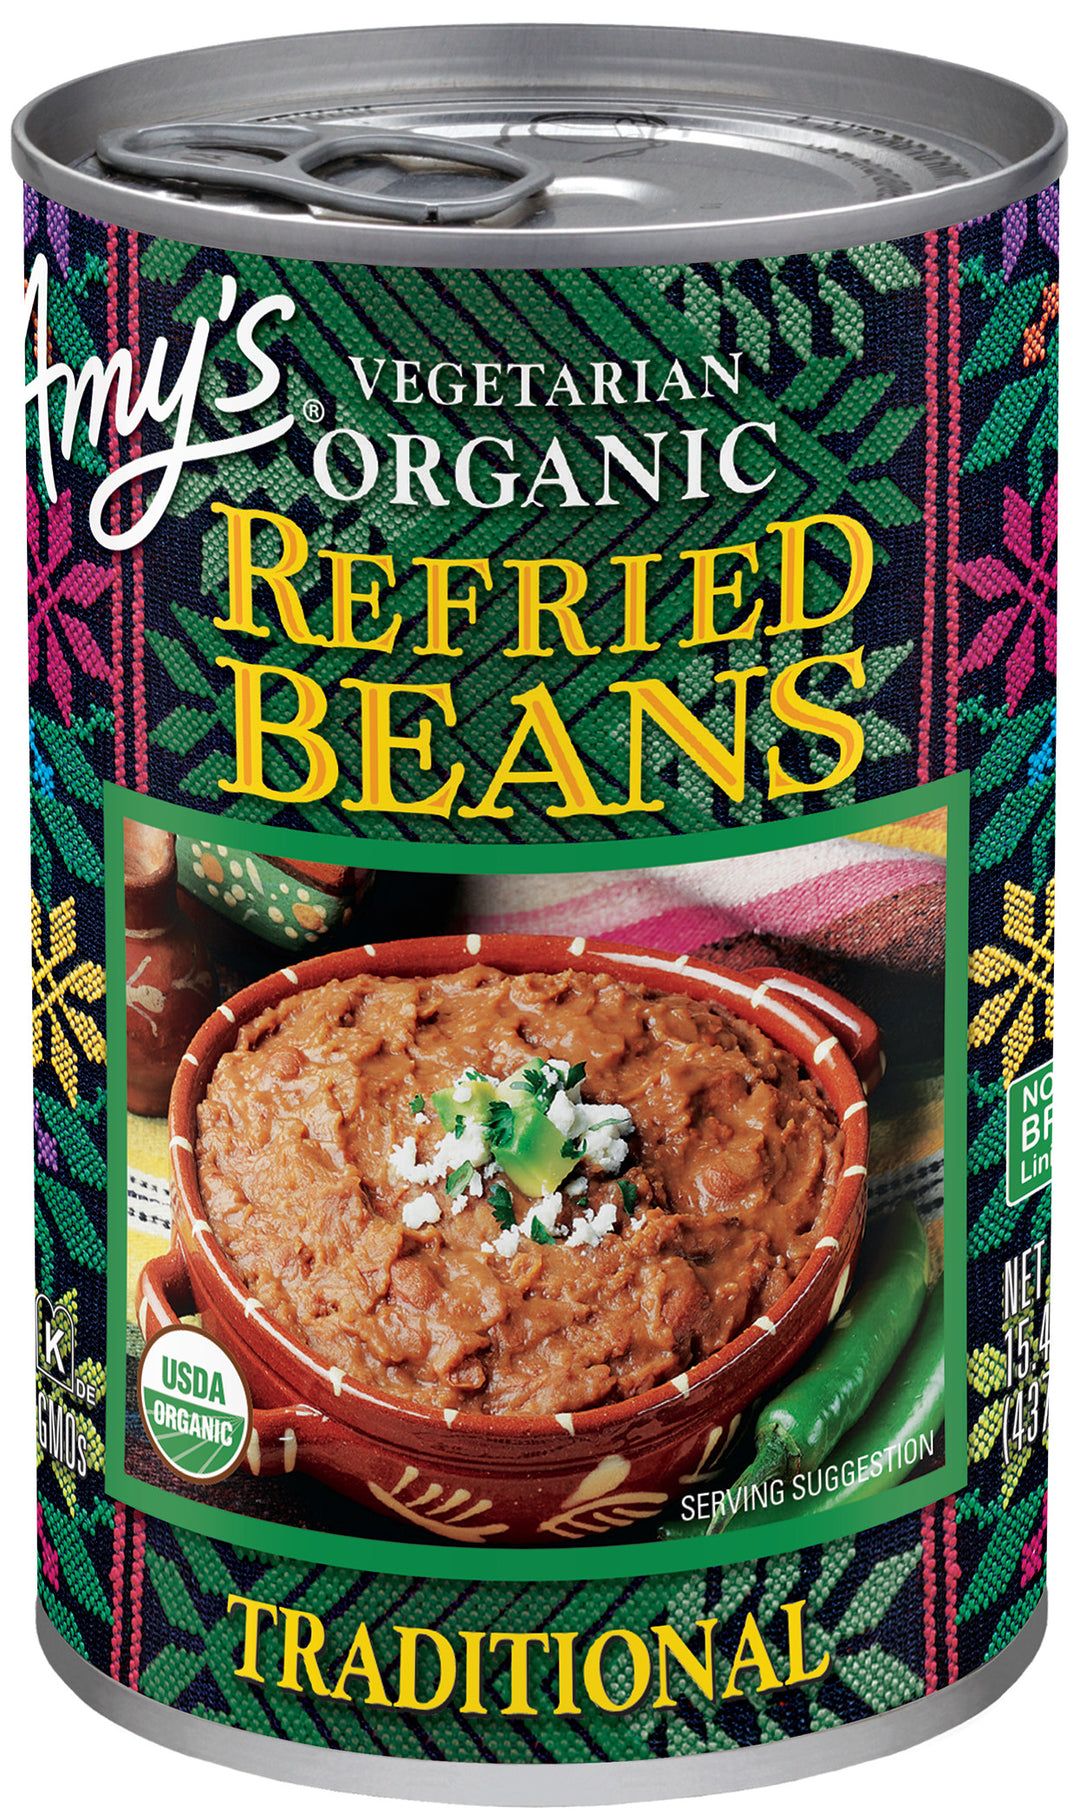 Amy's Refried Beans Traditional Organic-15.4 oz.-12/Case